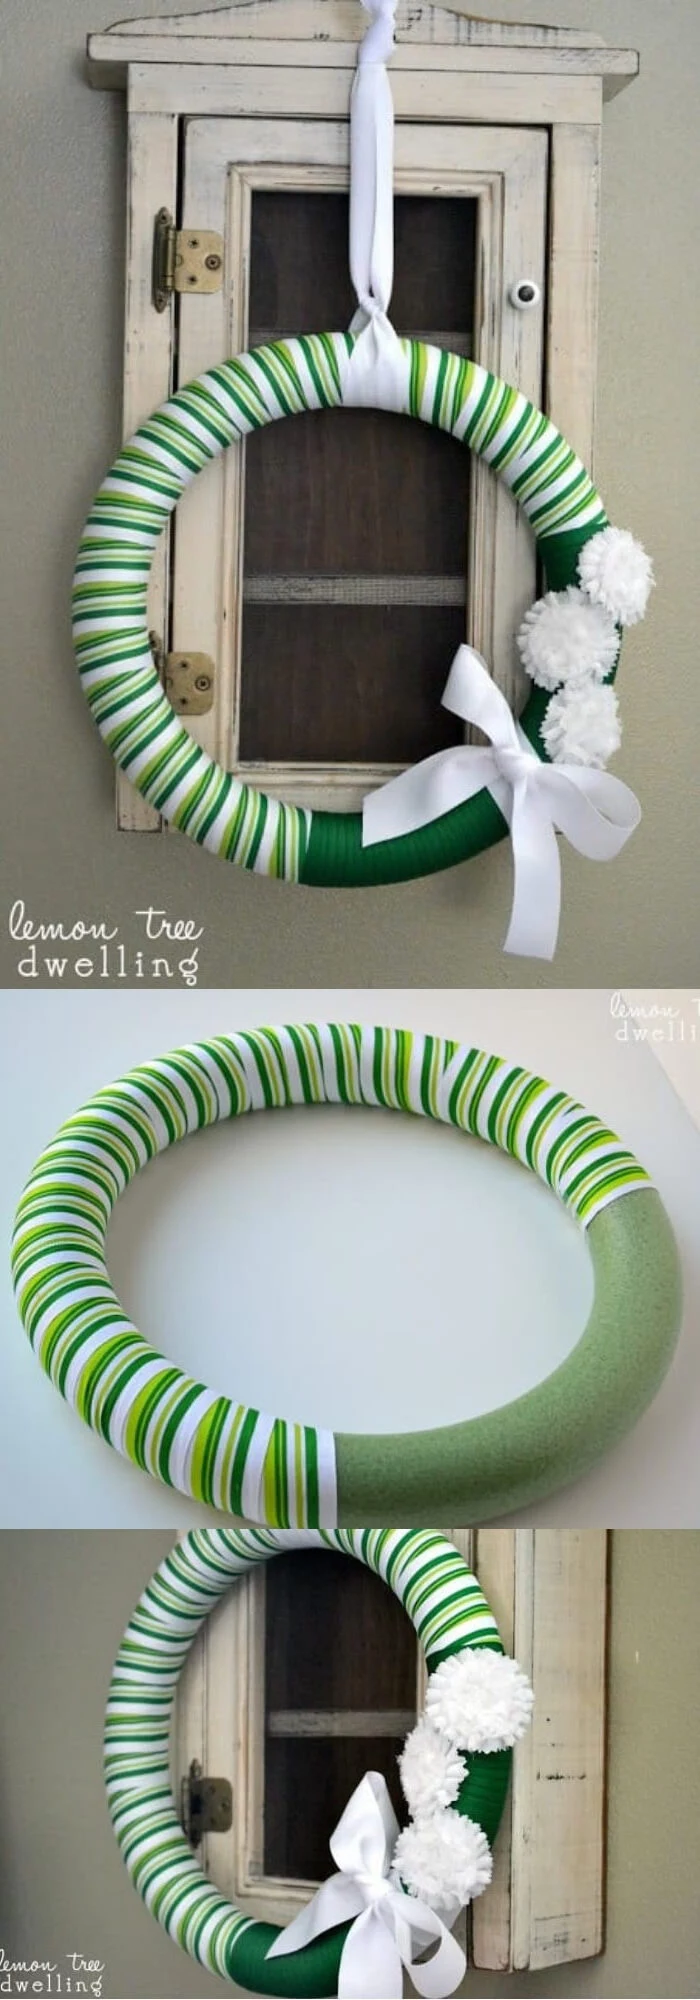 photo collage of step by step diy tutorial, wreath covered with green and white ribbon, st patricks decor